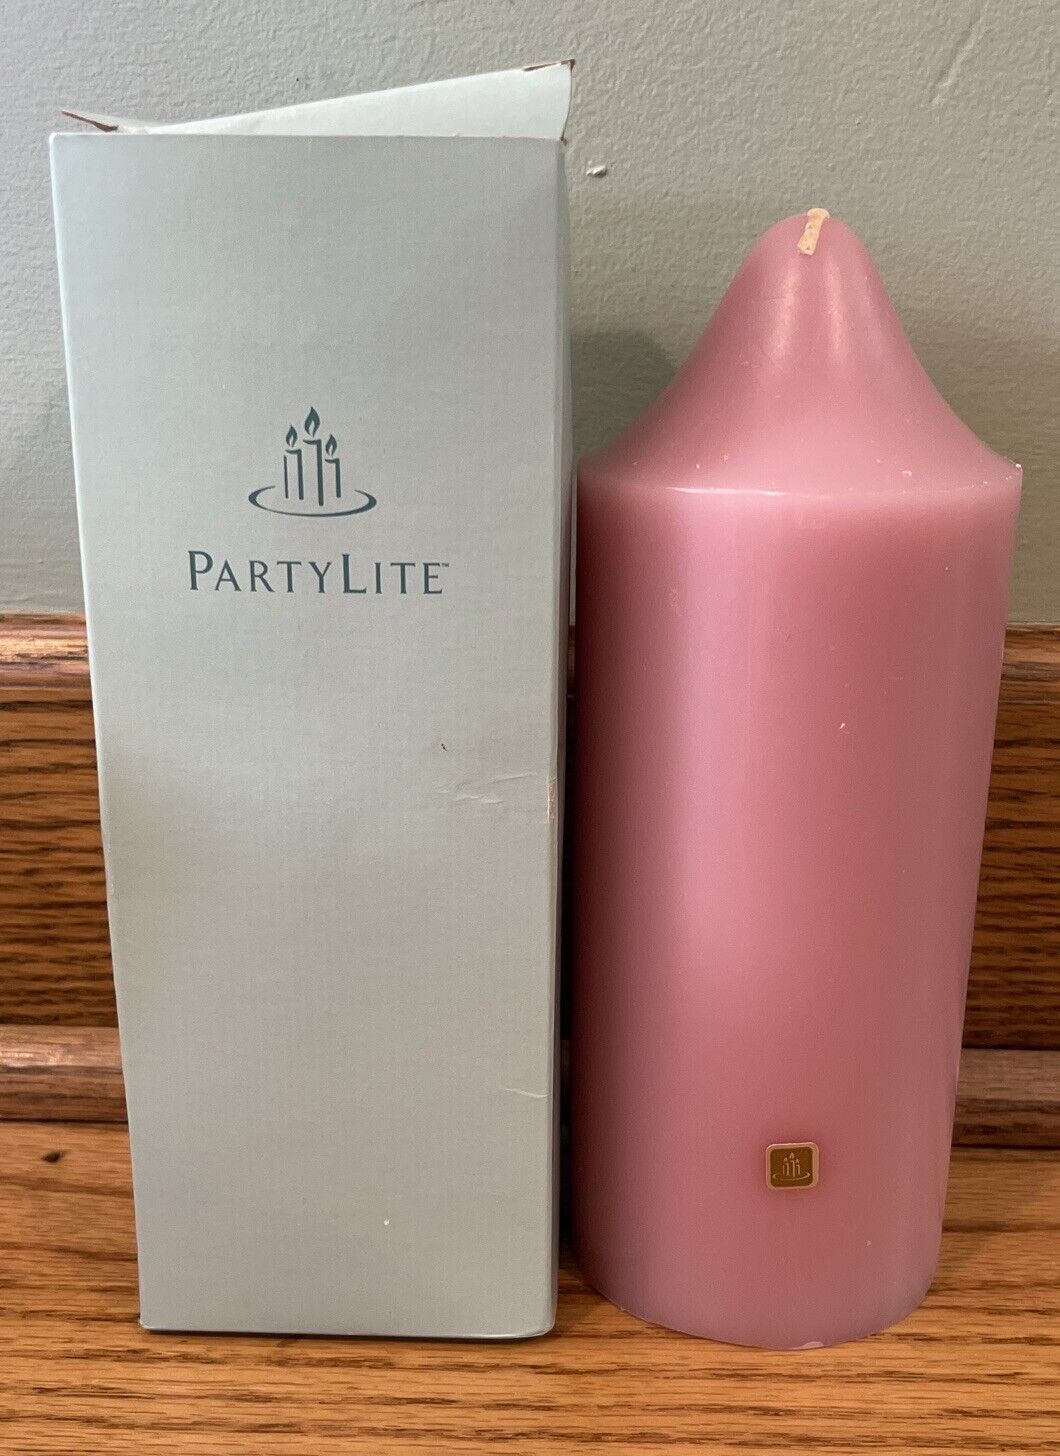 NEW PartyLite SPICED PLUM 3 x 7 Bell Top Round Pillar Candle S3737 NIB Retired